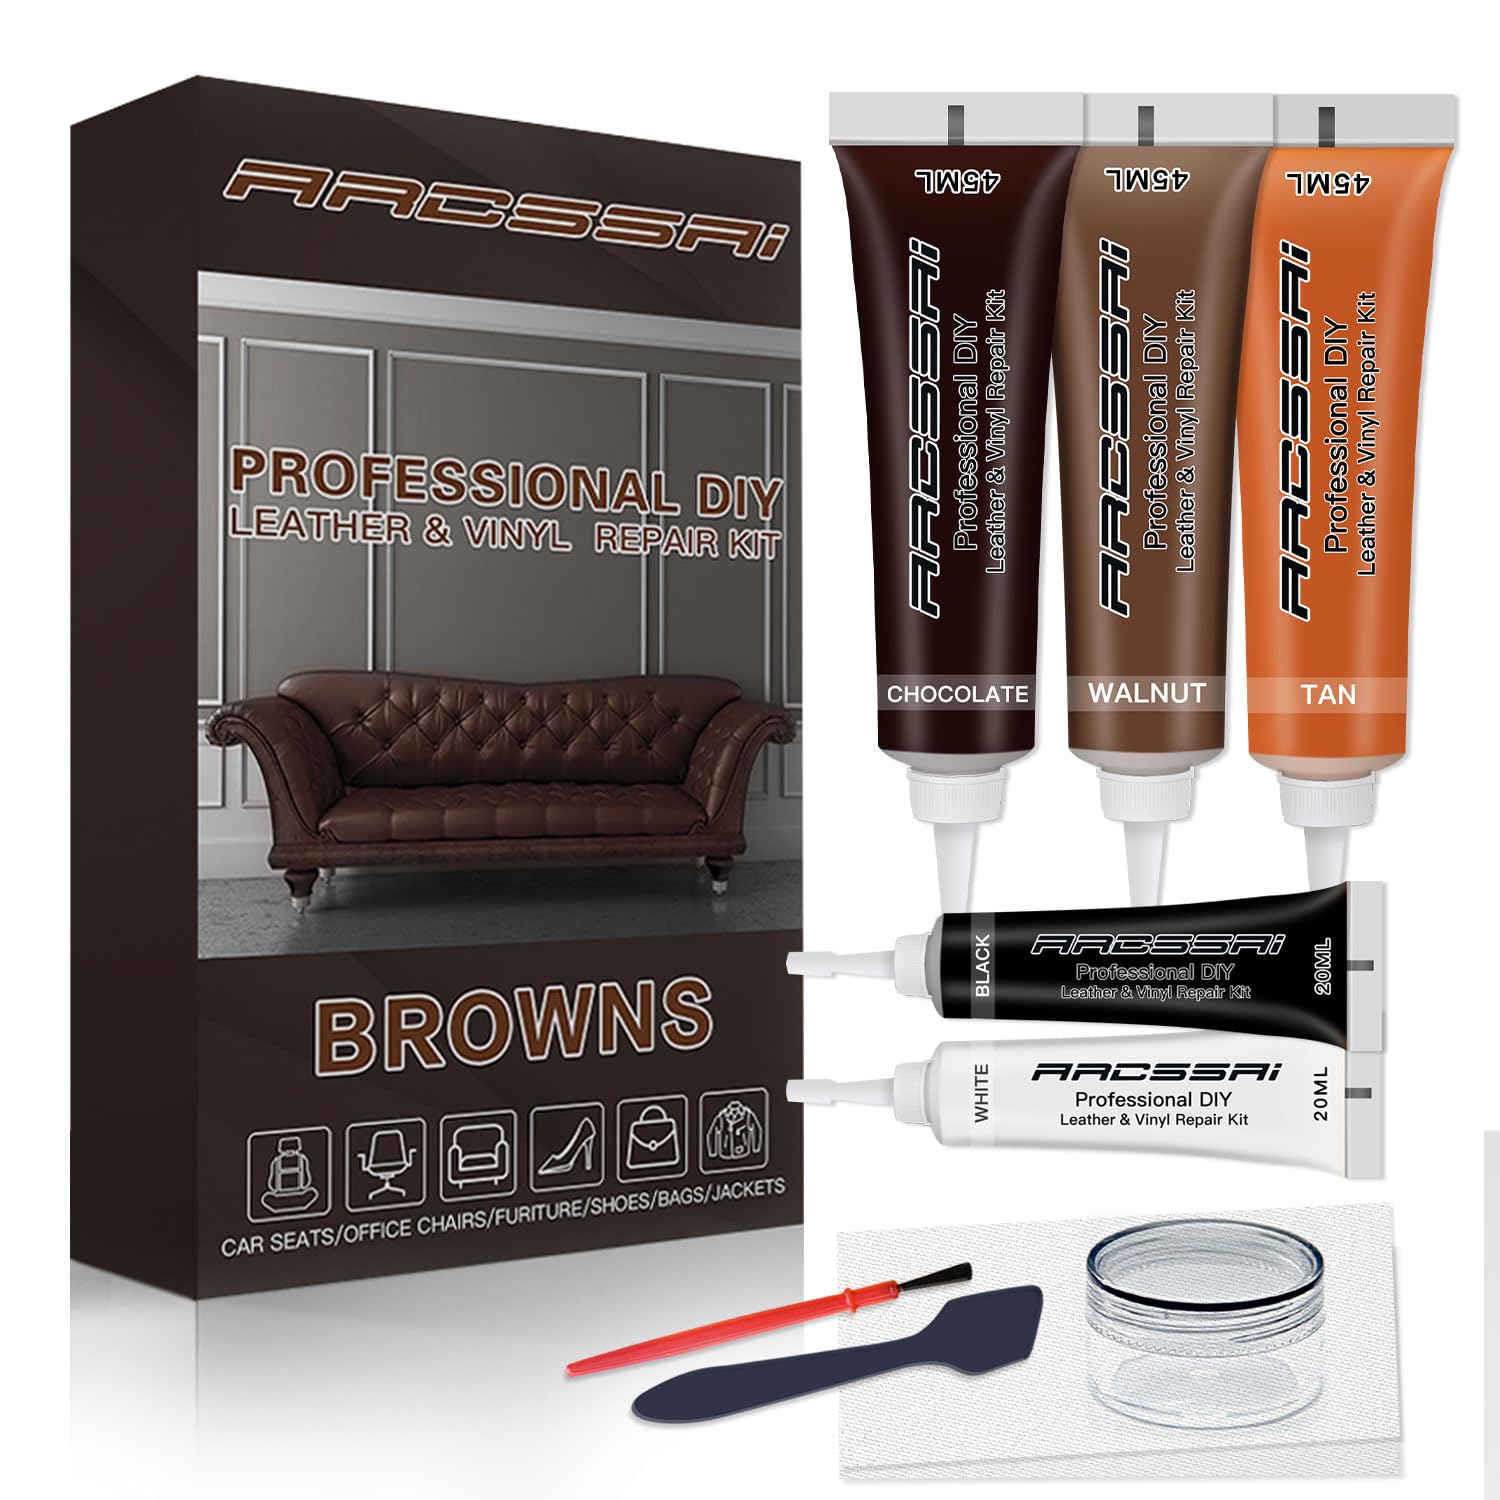 ARCSSAI ARCSSAL Brown Leather Repair Kits for Couches - Vinyl and Leather Repair Kit -Leather Paint- Leather Scratch, Tears & Burn Holes Repair 